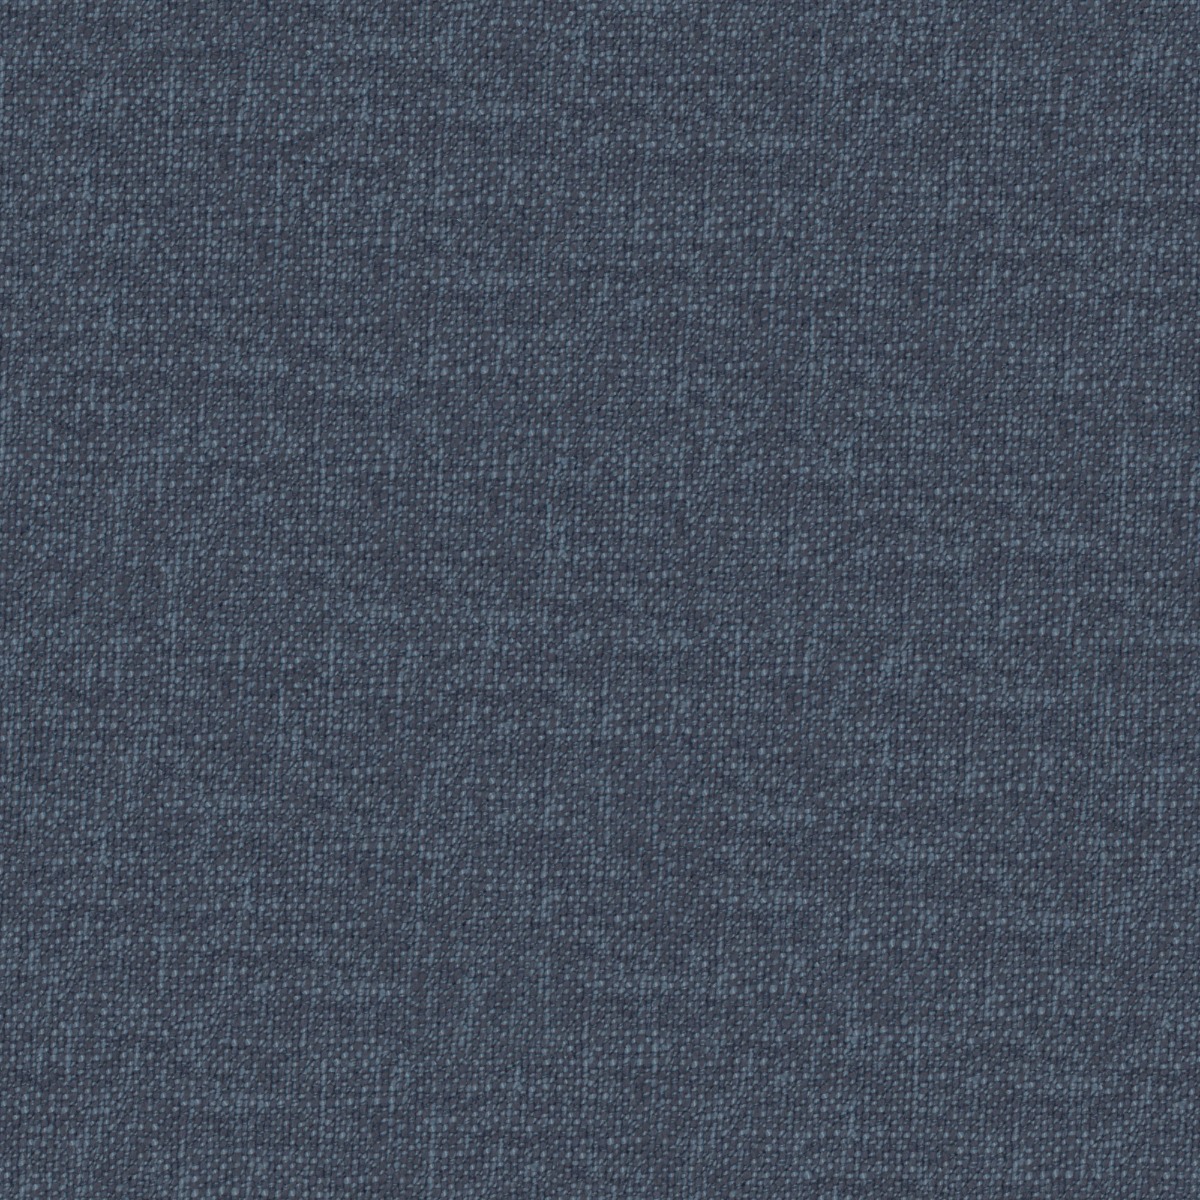 A seamless fabric texture with plain blue texture units arranged in a None pattern